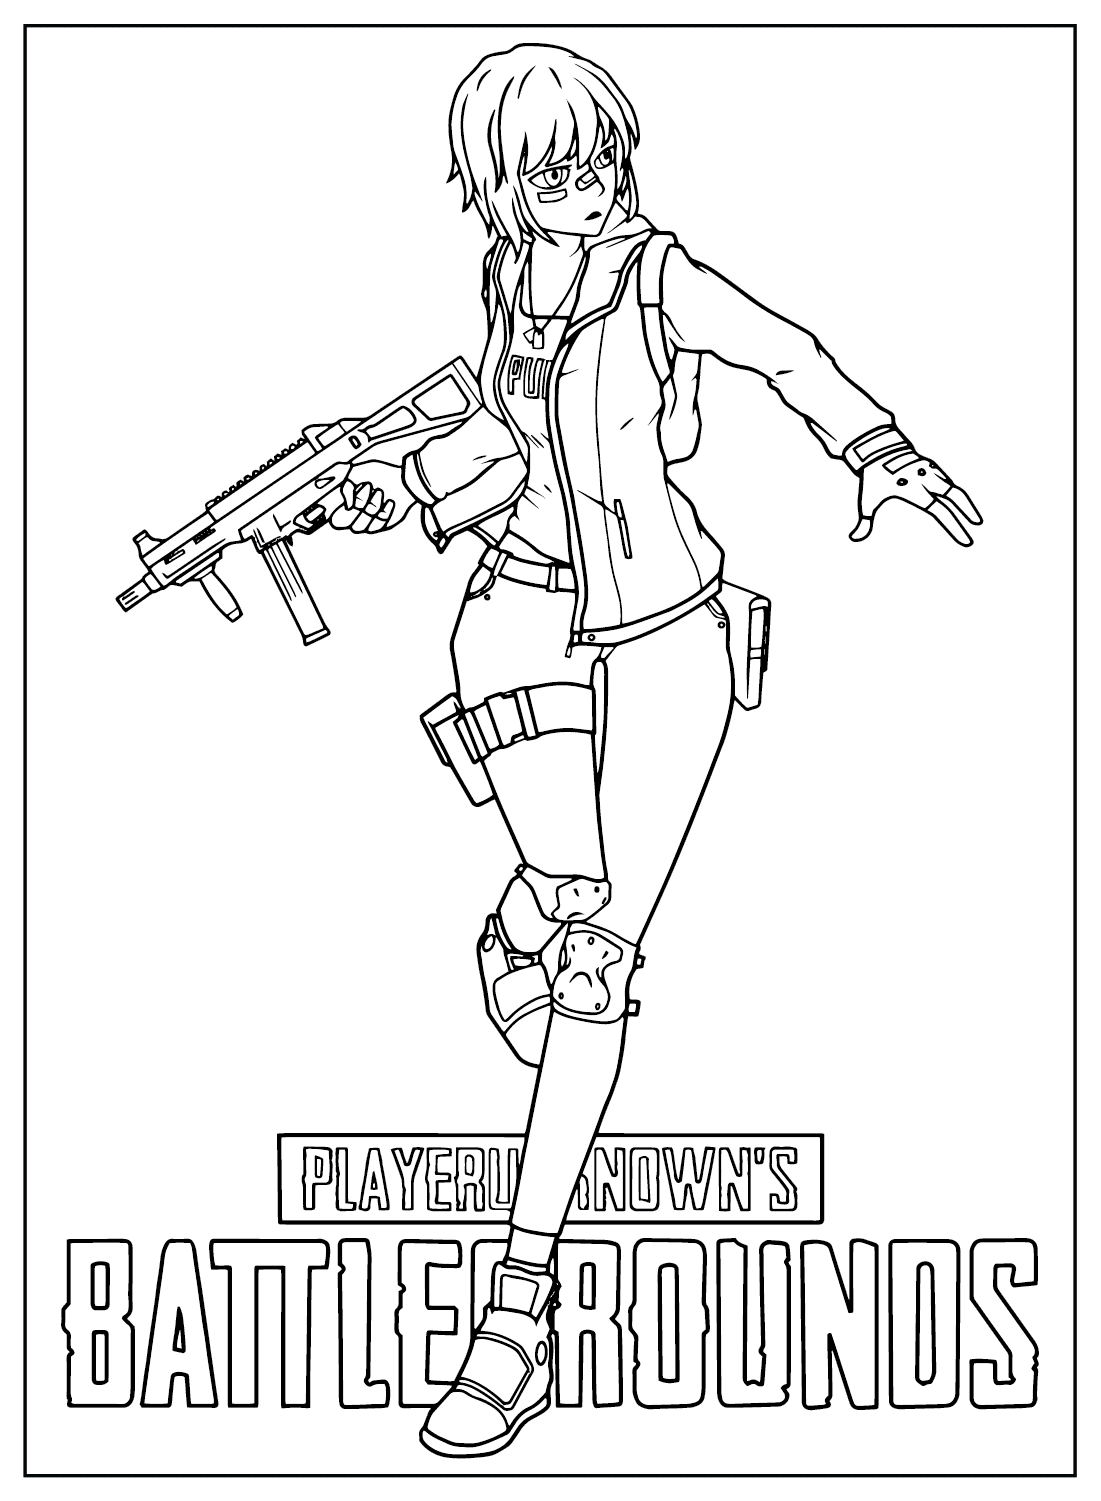 Battle Royale Game Pubg Coloring Page - Free Printable Coloring Pages